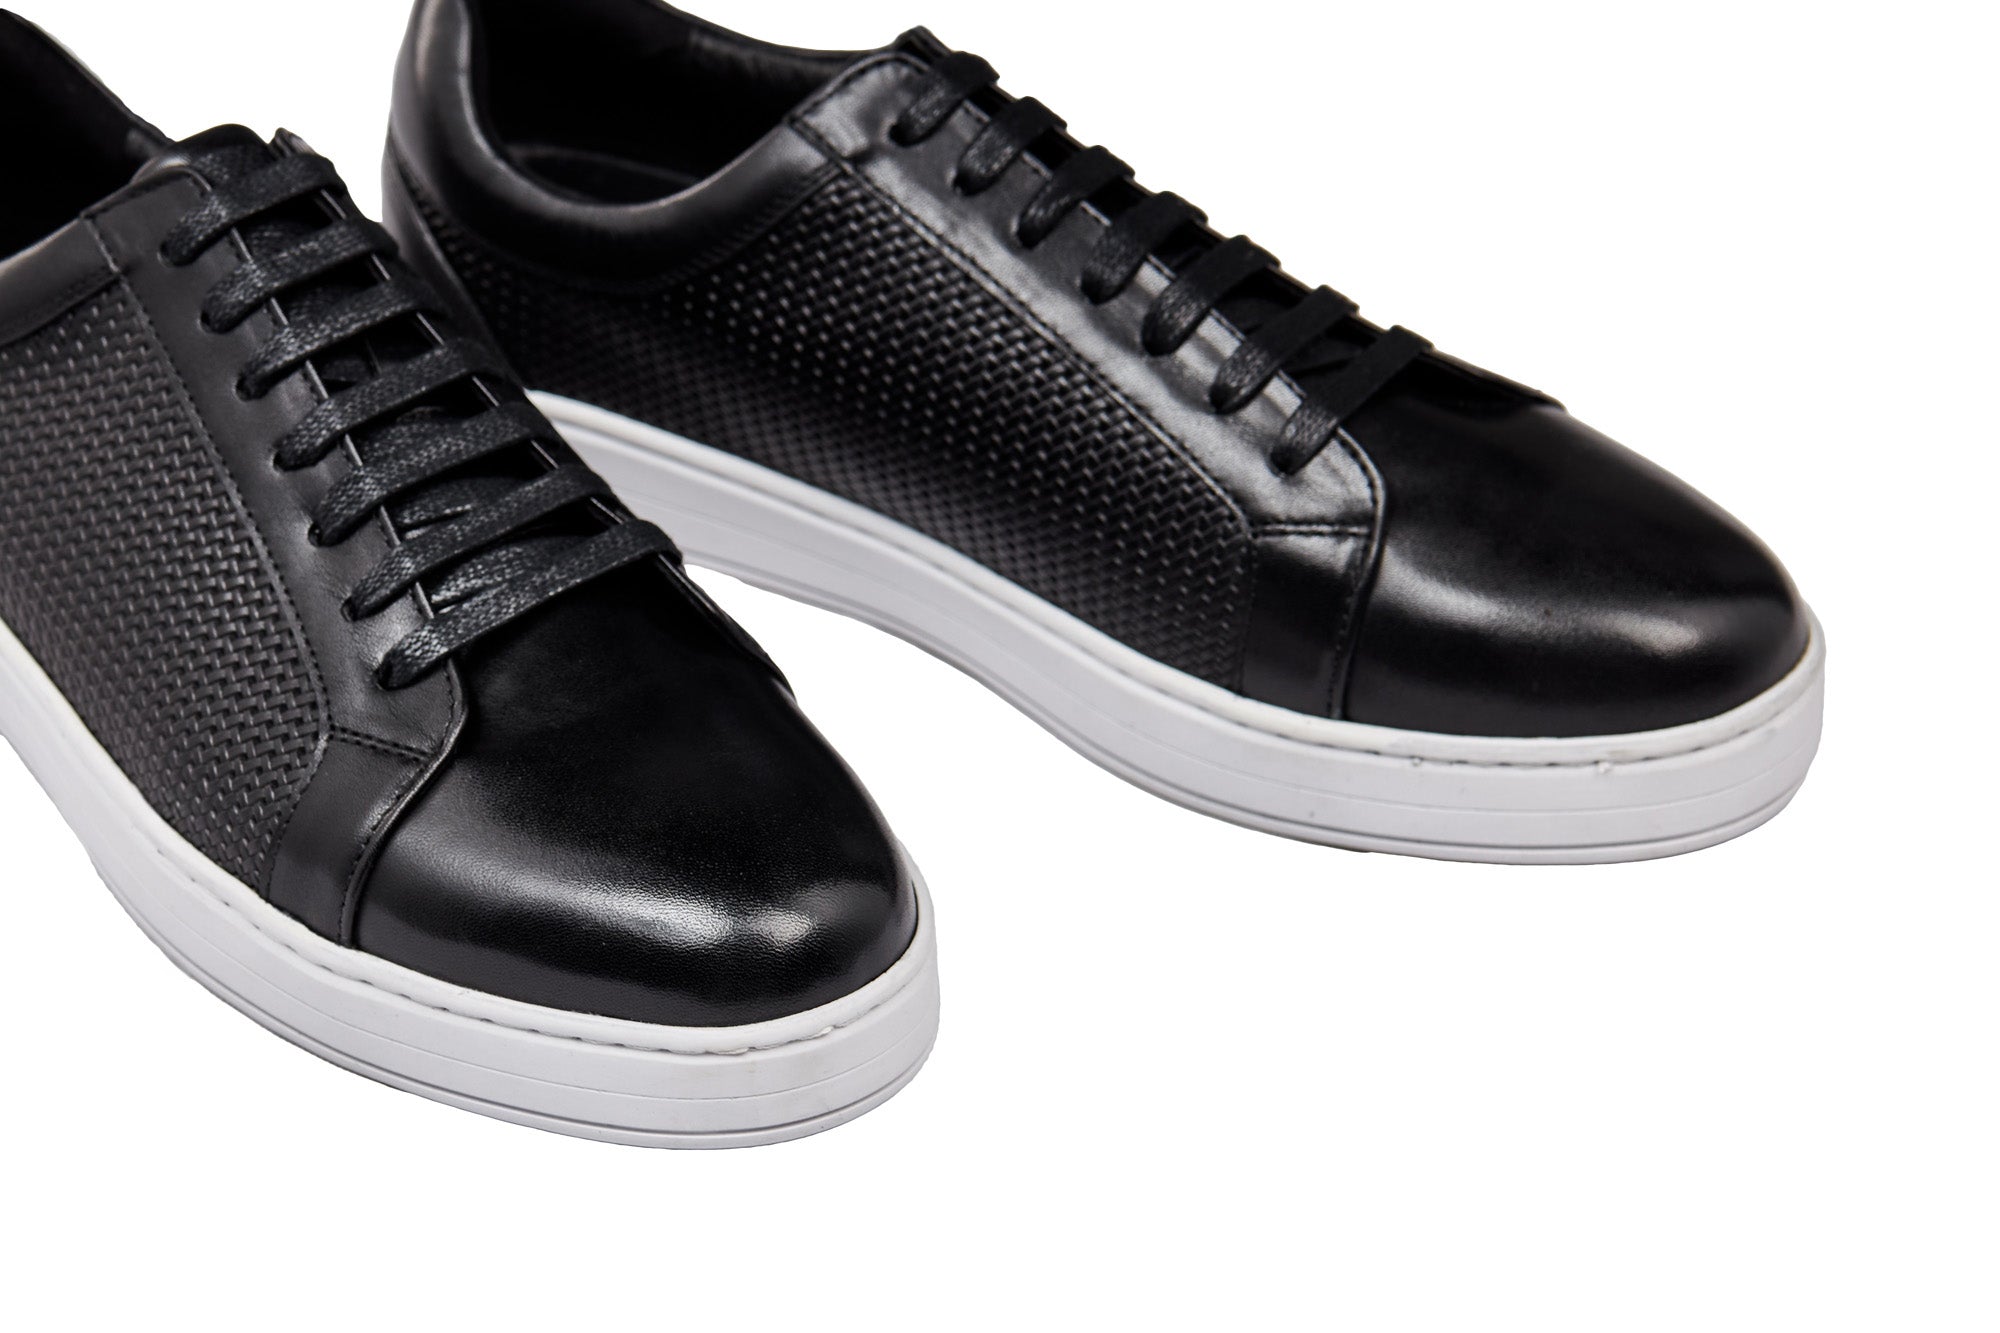 BLACK LEATHER SNEAKERS